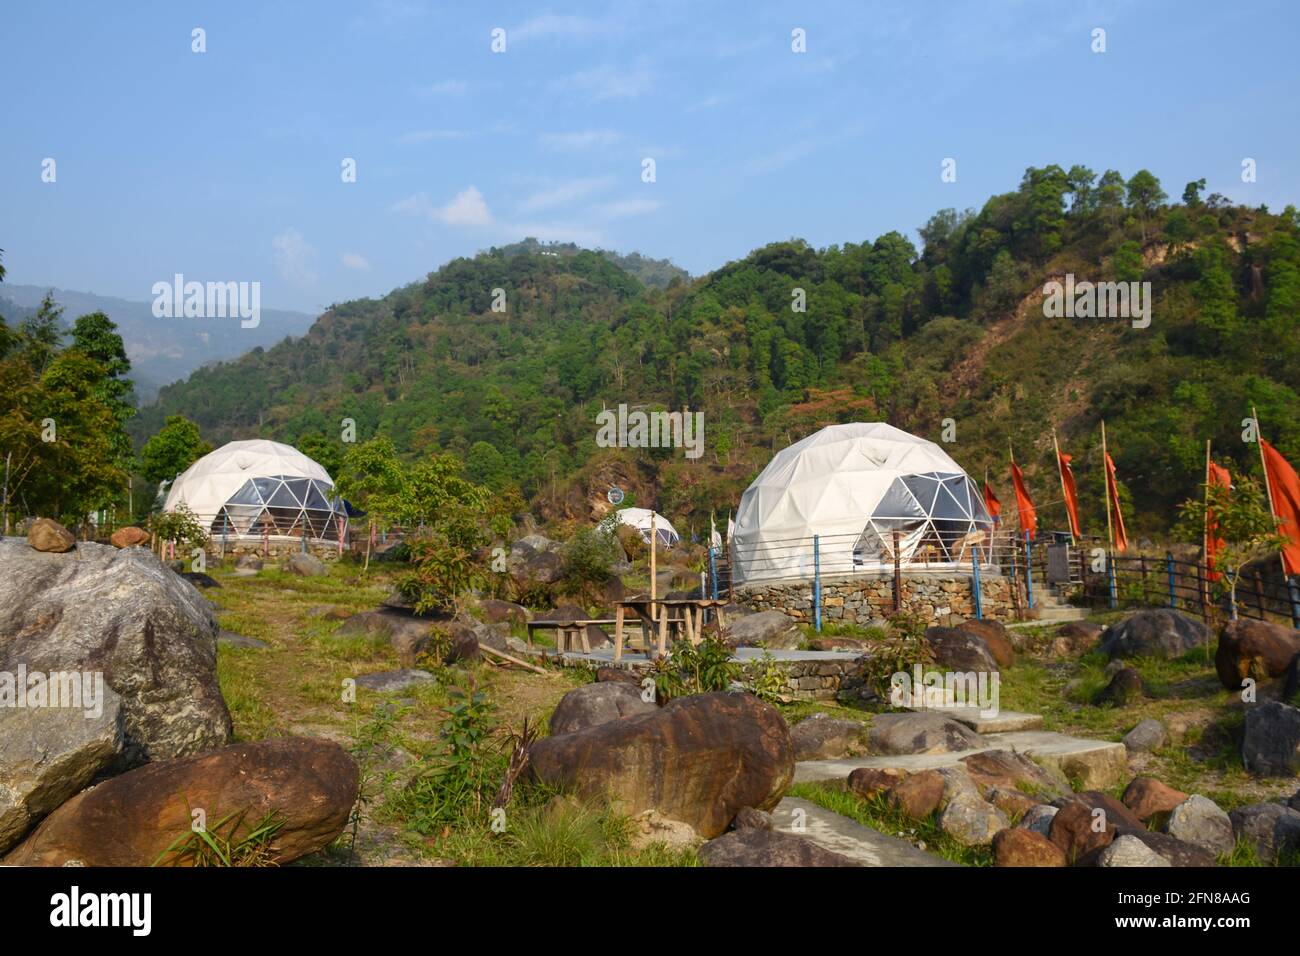 A Igloo Tent house in the backdrop of forest in the himalayan foot hill of Todey, Kalimpong. Stock Photo